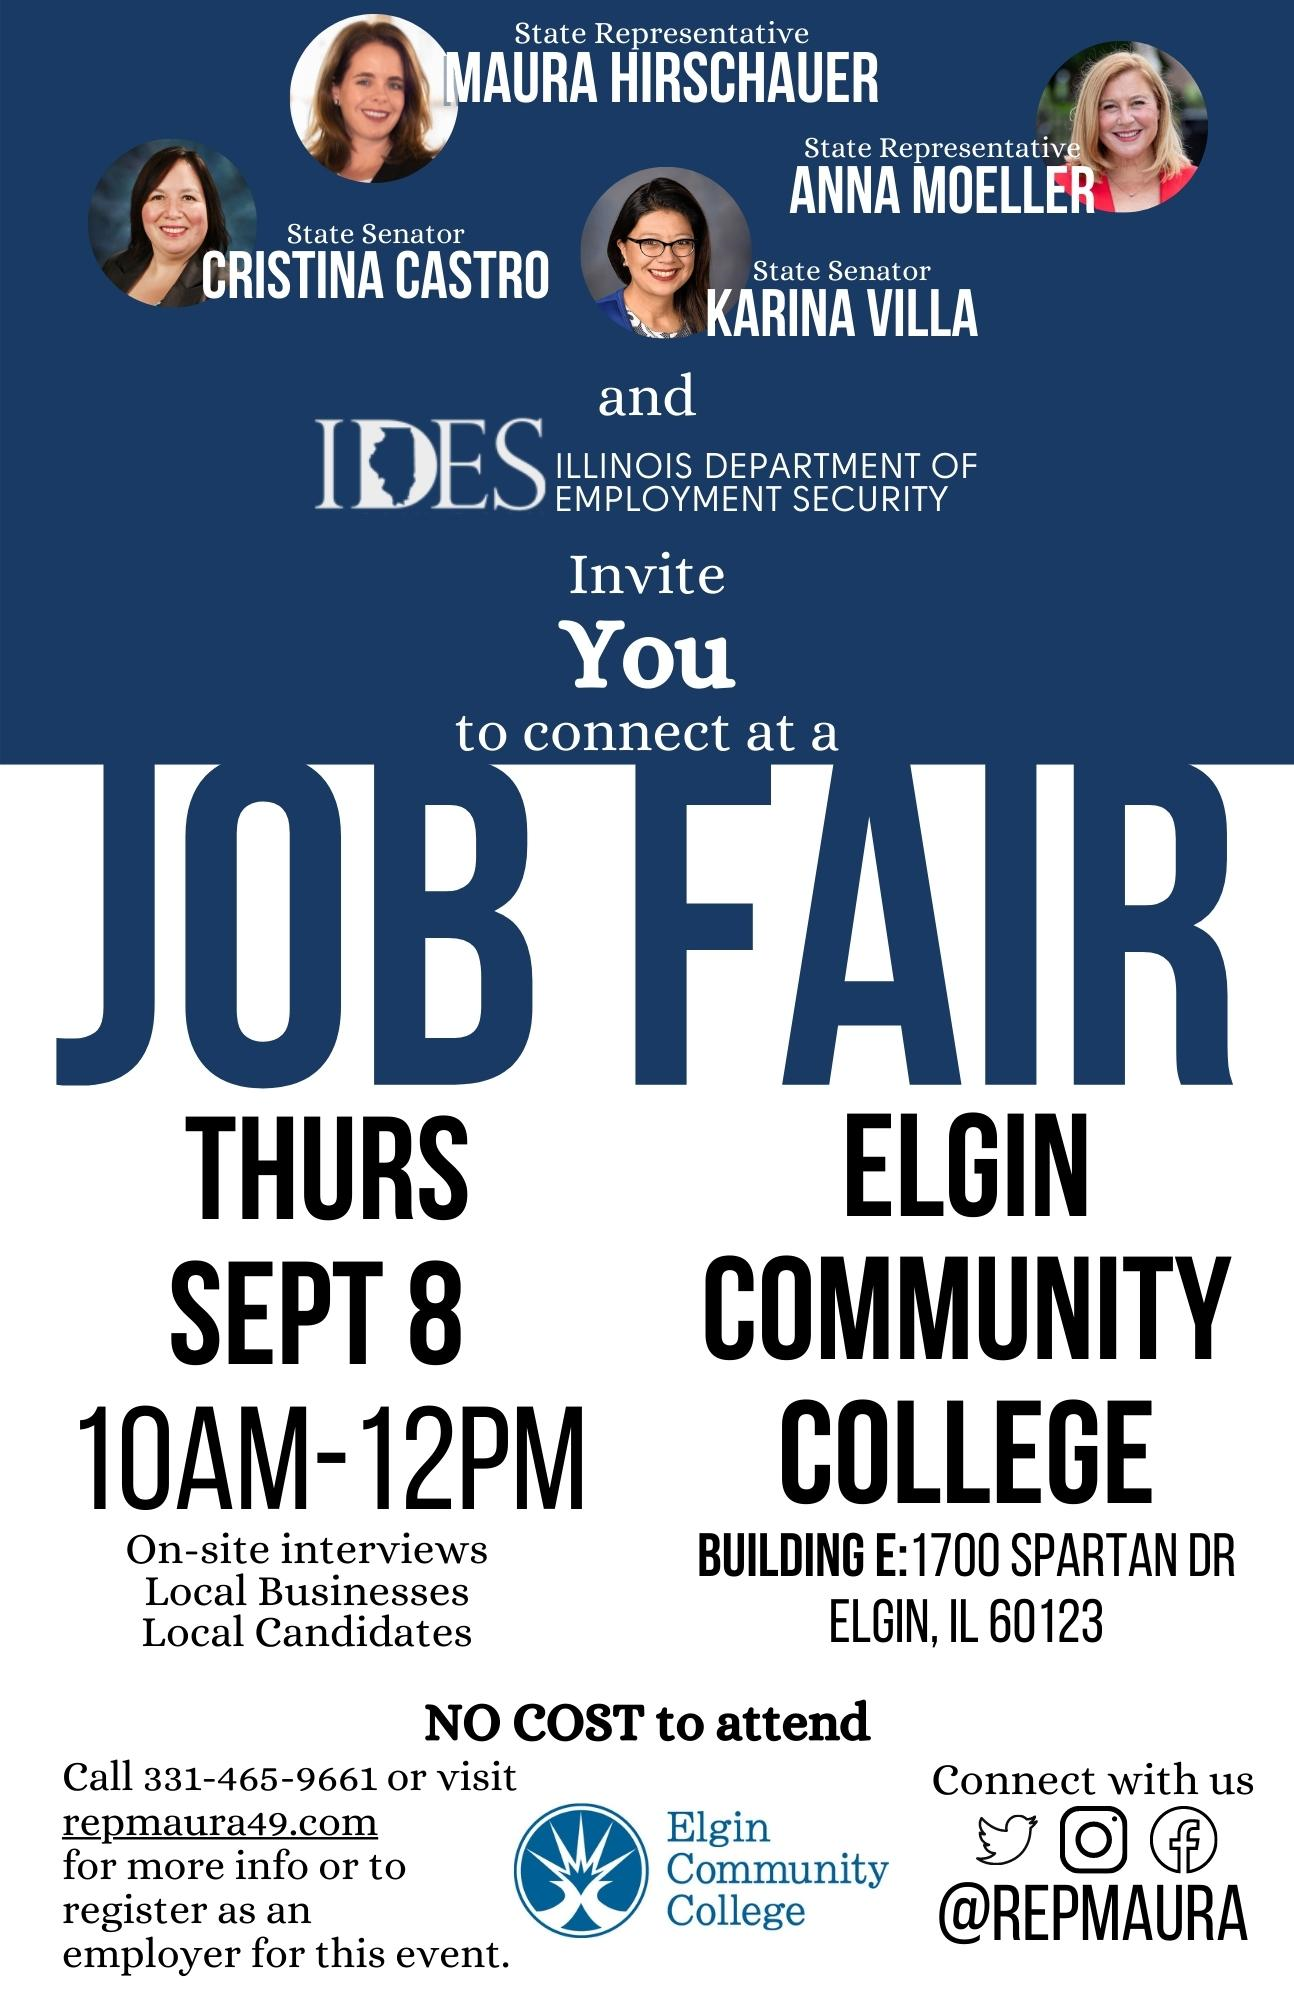 Castro invites employers and job seekers to connect at upcoming Elgin job fair